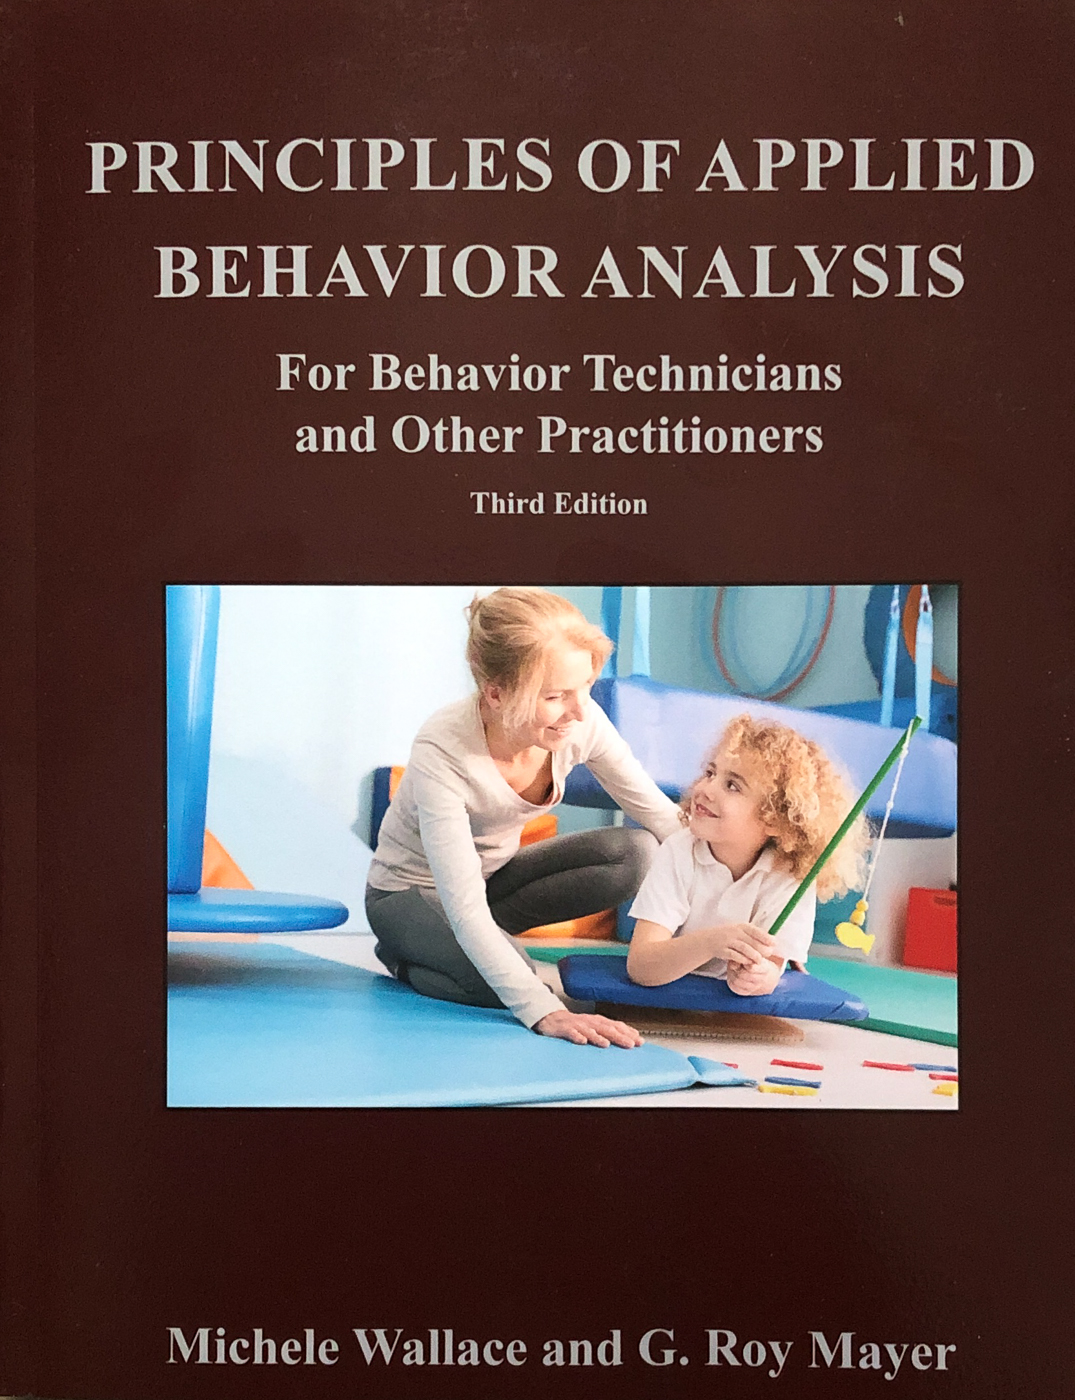 applied behavior analysis research articles